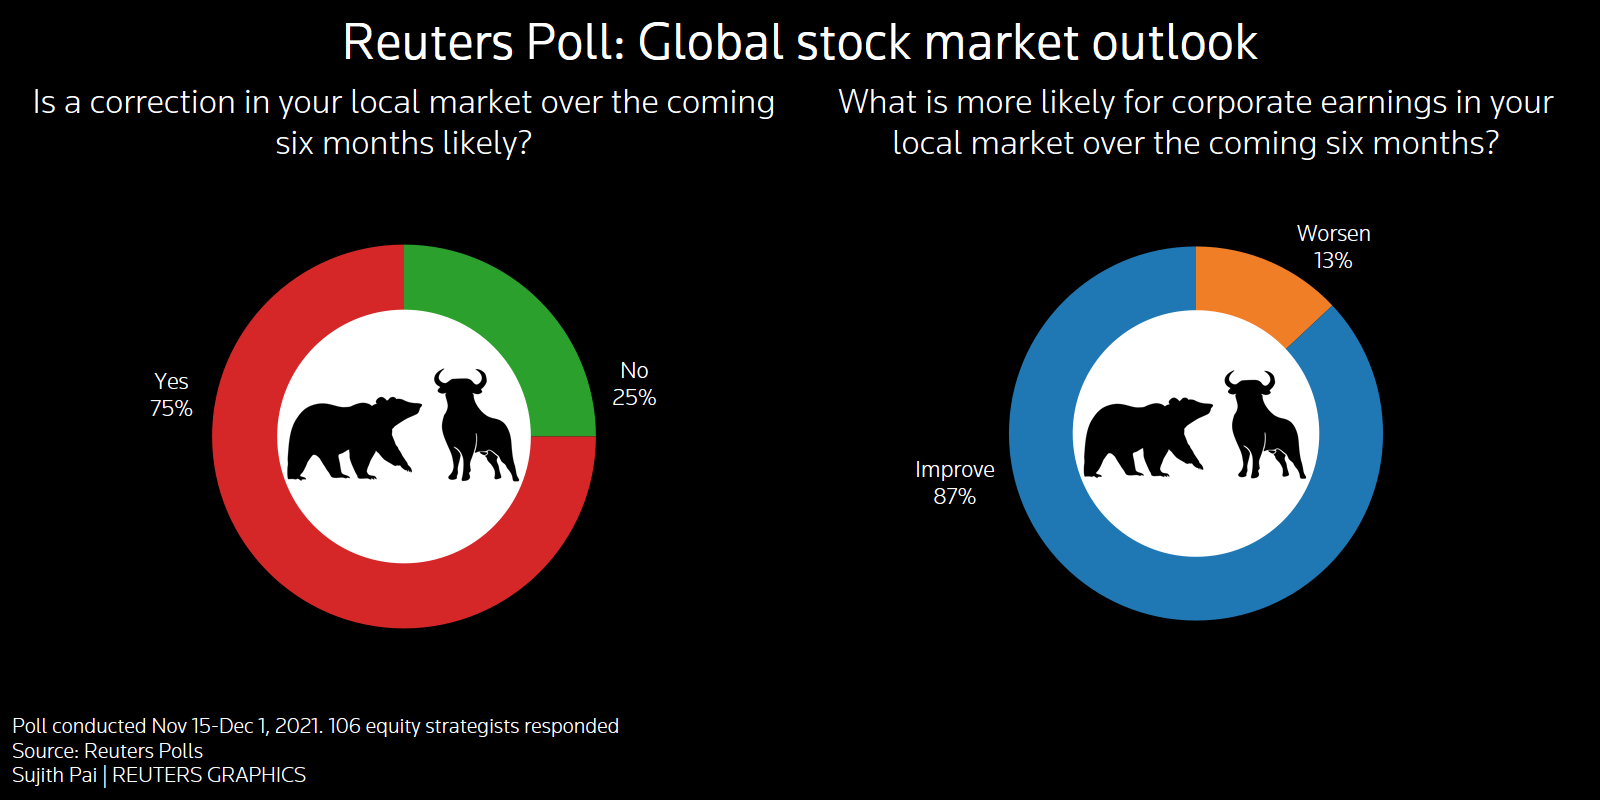 Reuters poll graphic on global stock market forecasts